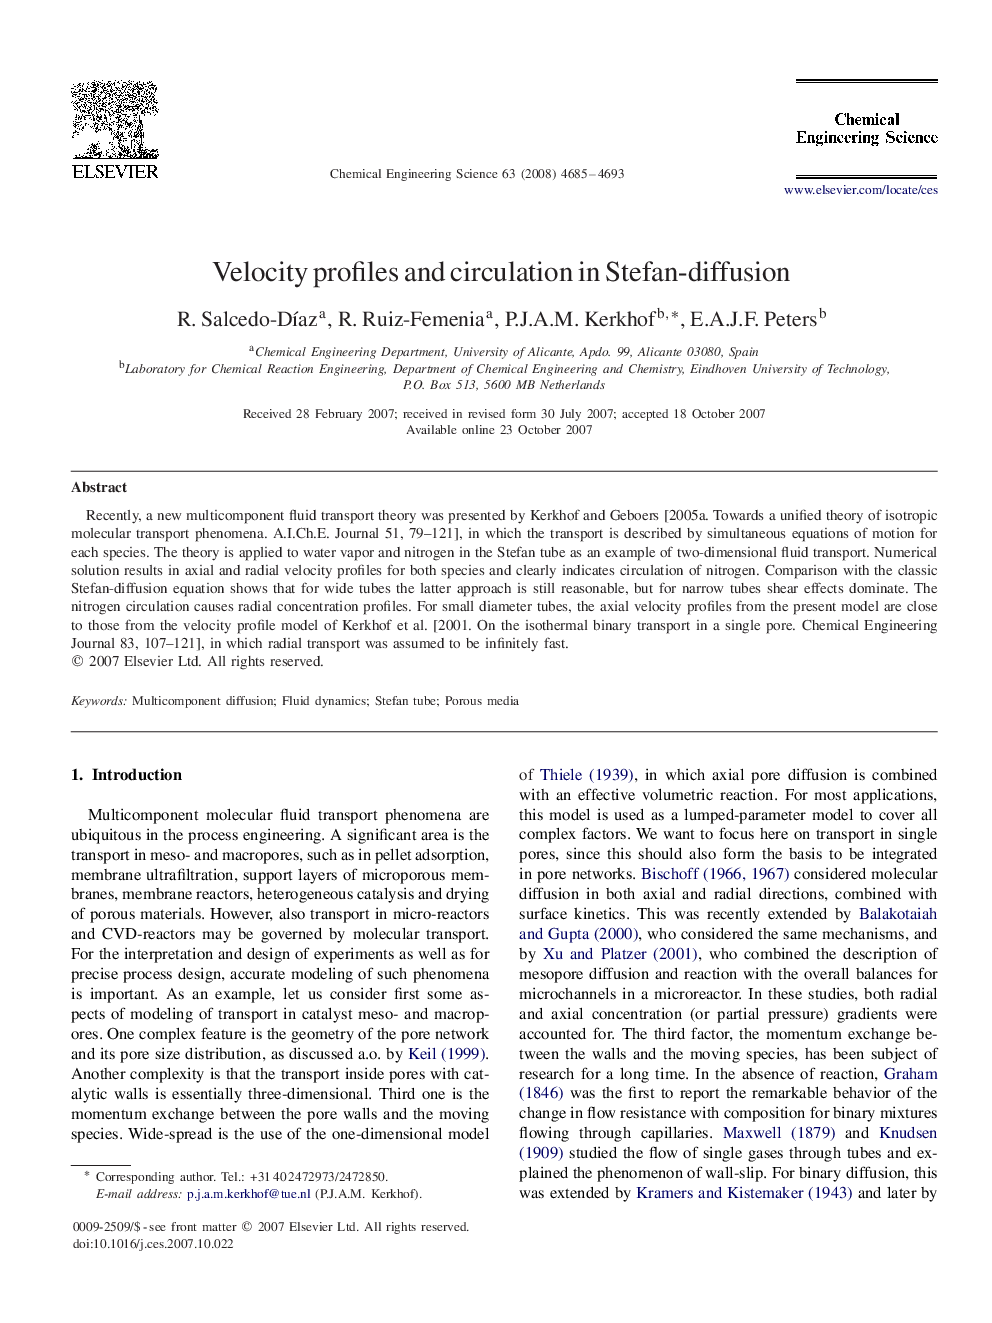 Velocity profiles and circulation in Stefan-diffusion